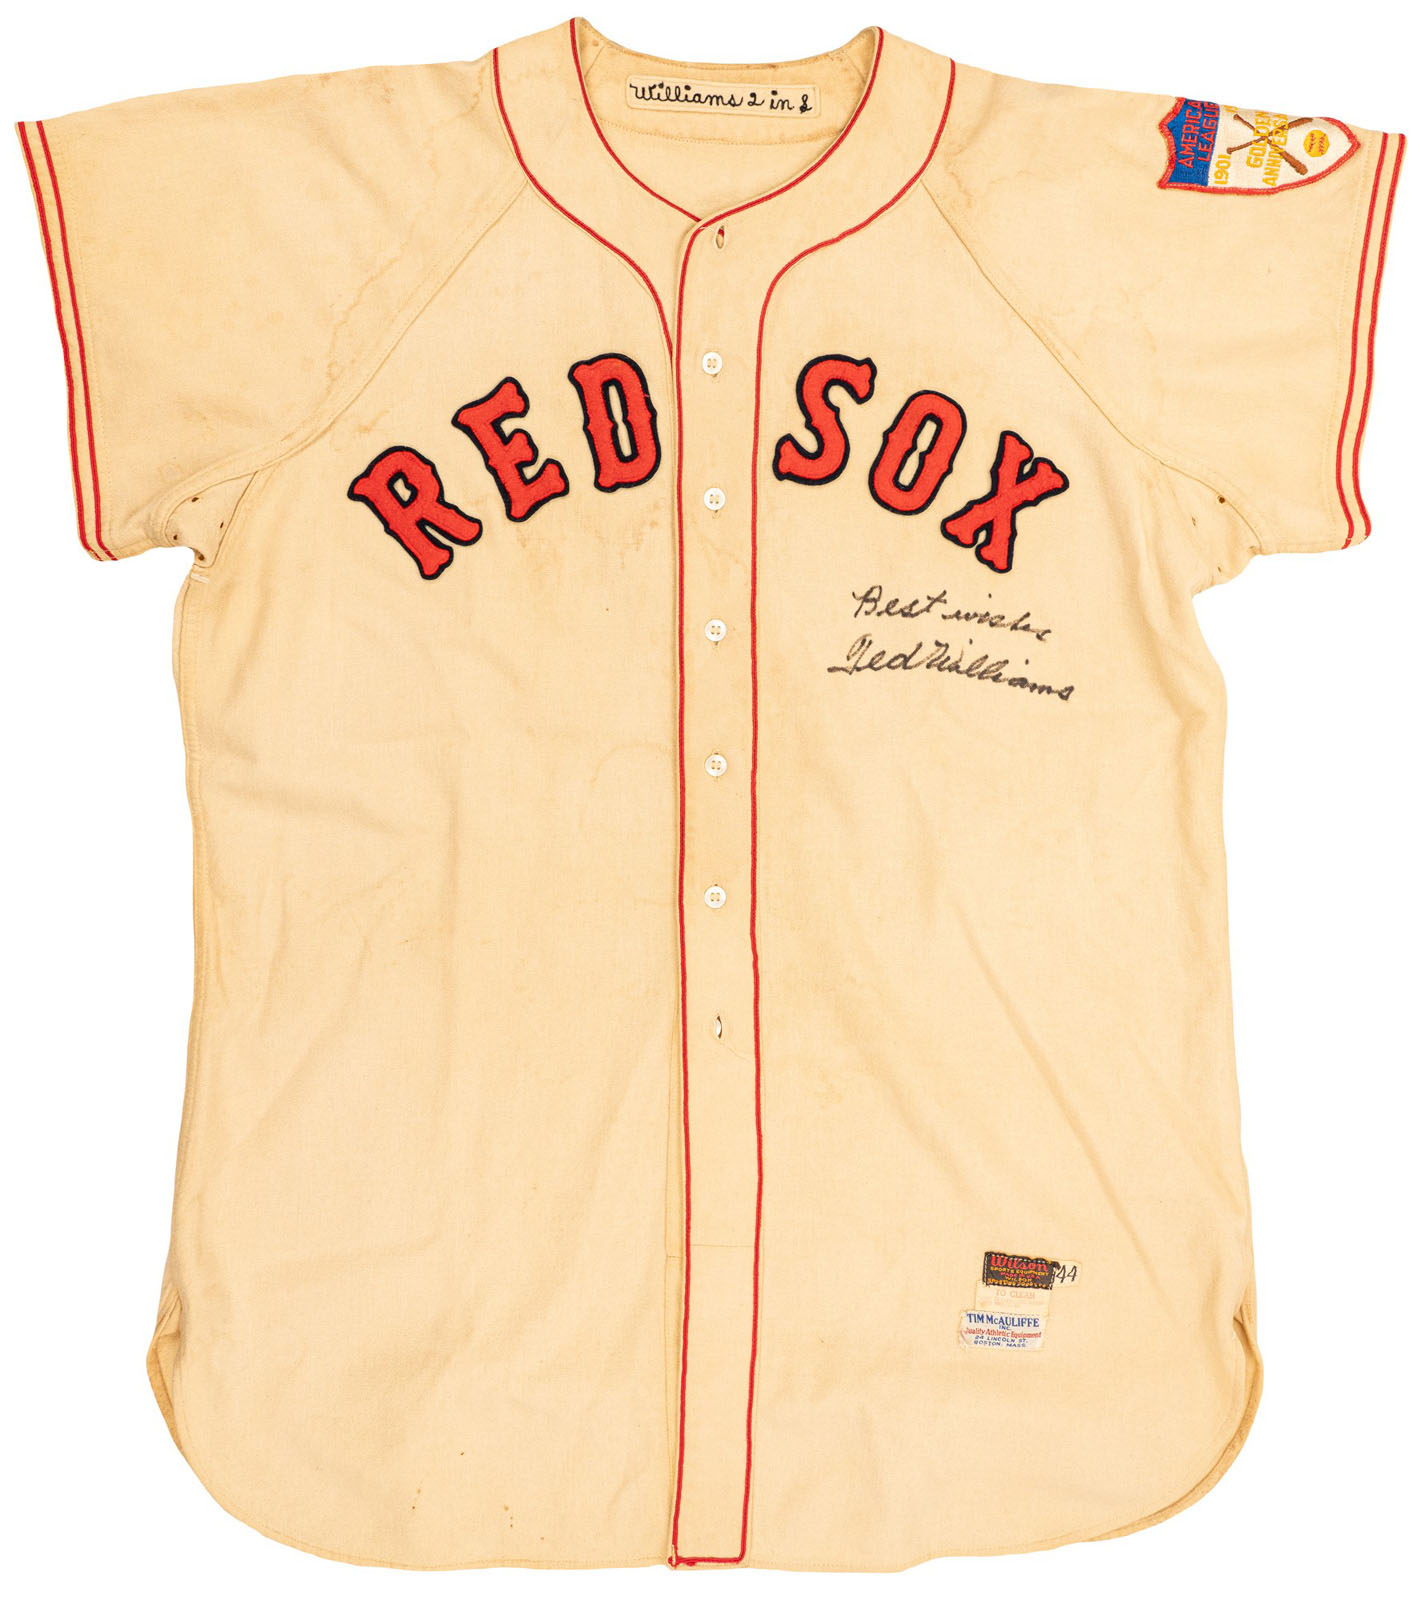 Sold at Auction: Fine 1954 Ted Williams Boston Red Sox professional model road  jersey (SGC/Grob: Superior).